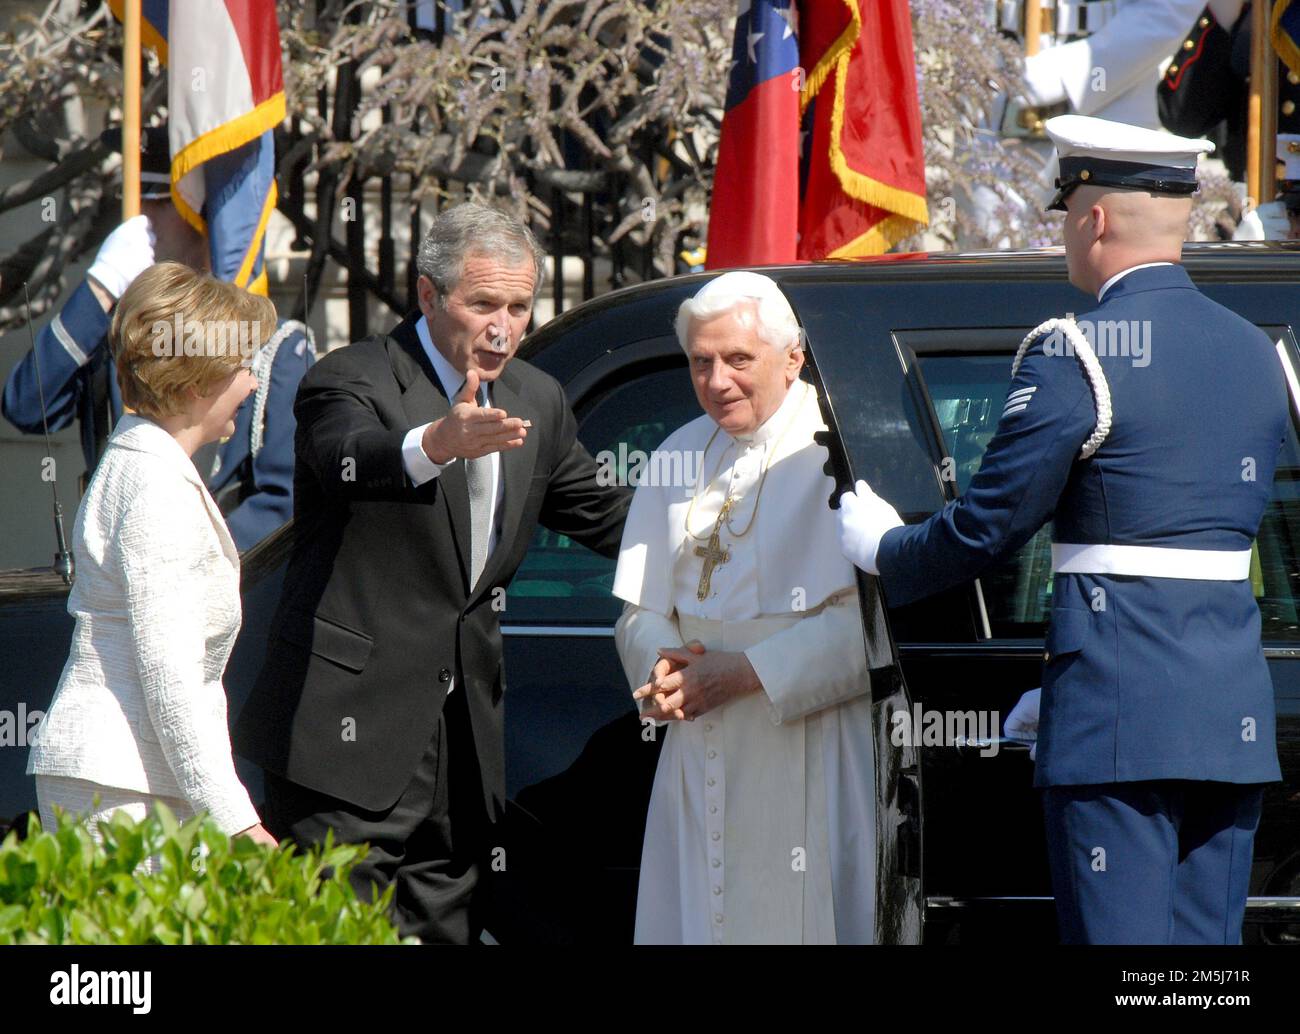 United States President George W. Bush, center invites Pope Benedict XVI, right, towards the podium as he arrives at the White House in Washington, D.C. on Wednesday, April 16, 2008. First lady Laura Bush is at far left. .Credit: Ron Sachs / CNP.(RESTRICTION: NO New York or New Jersey Newspapers or newspapers within a 75 mile radius of New York City) / MediaPunch Stock Photo